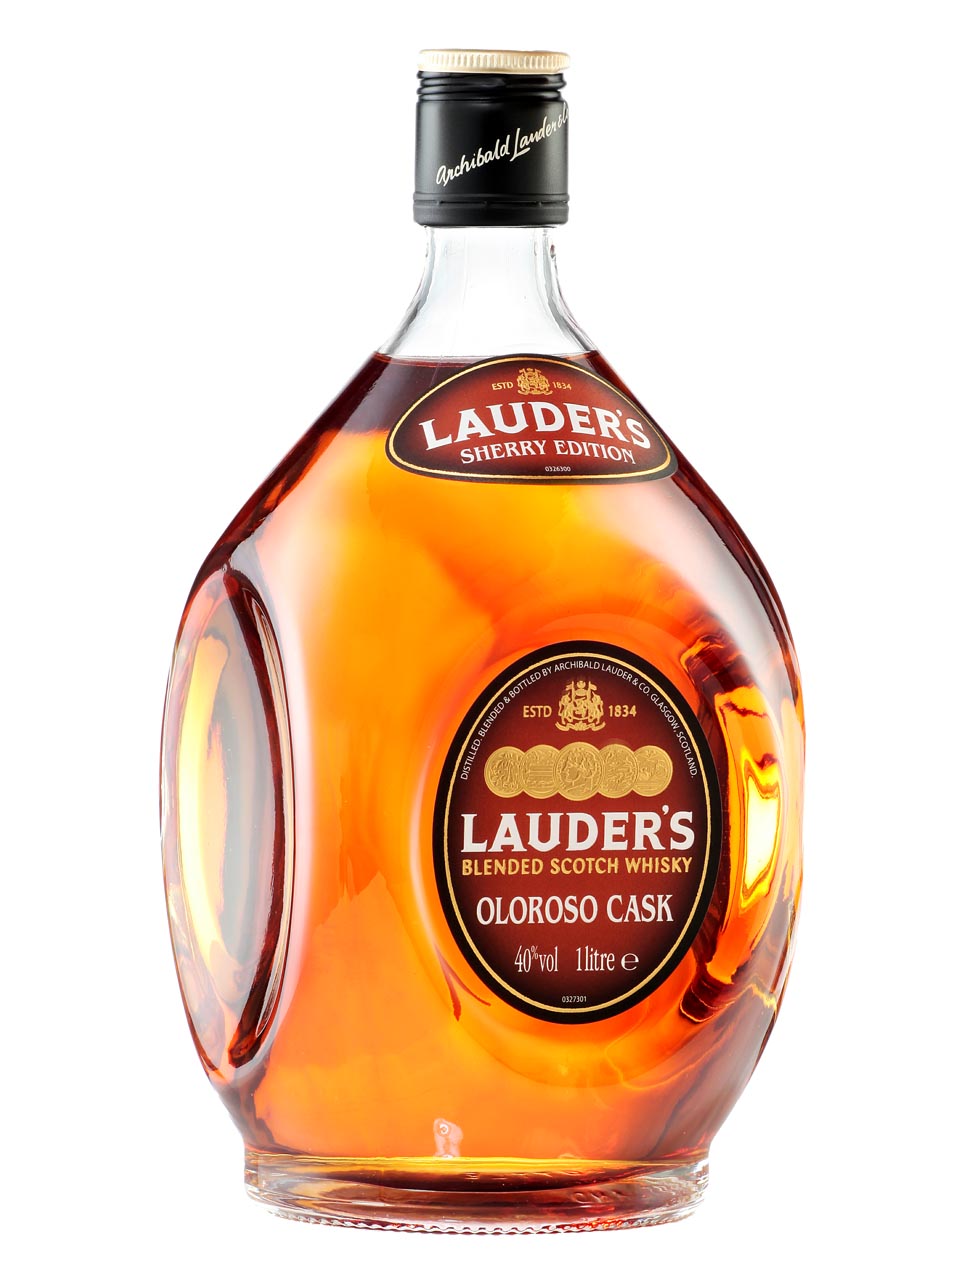 Lauder's Sherry Edition Oloroso Cask 40% 1L null - onesize - 1